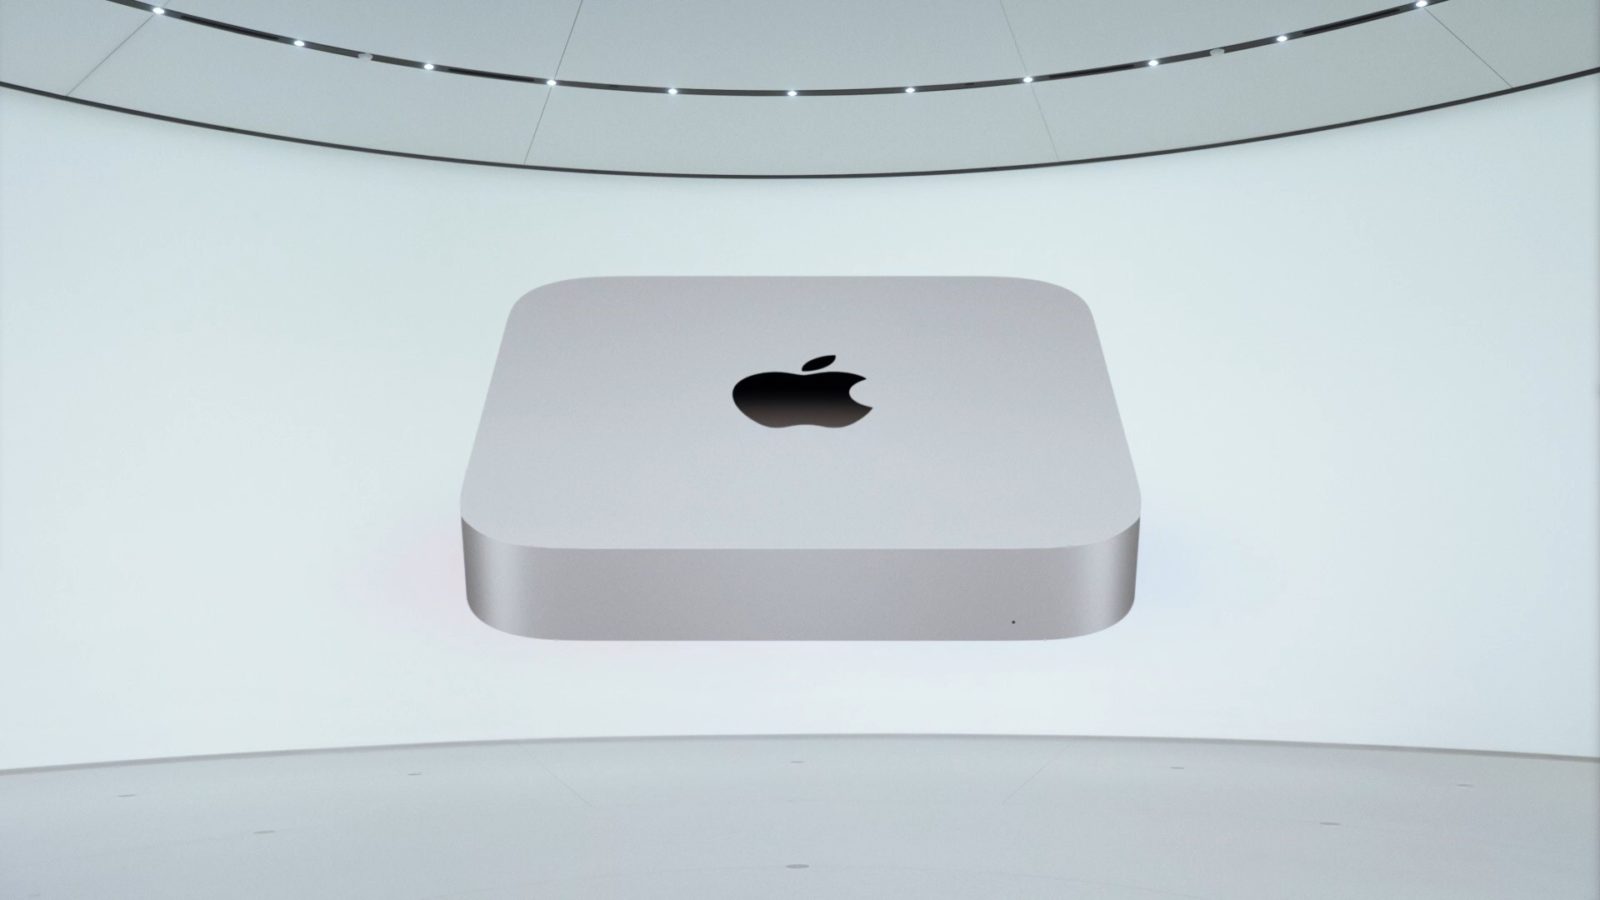 New Mac mini appears later this year with M2 and